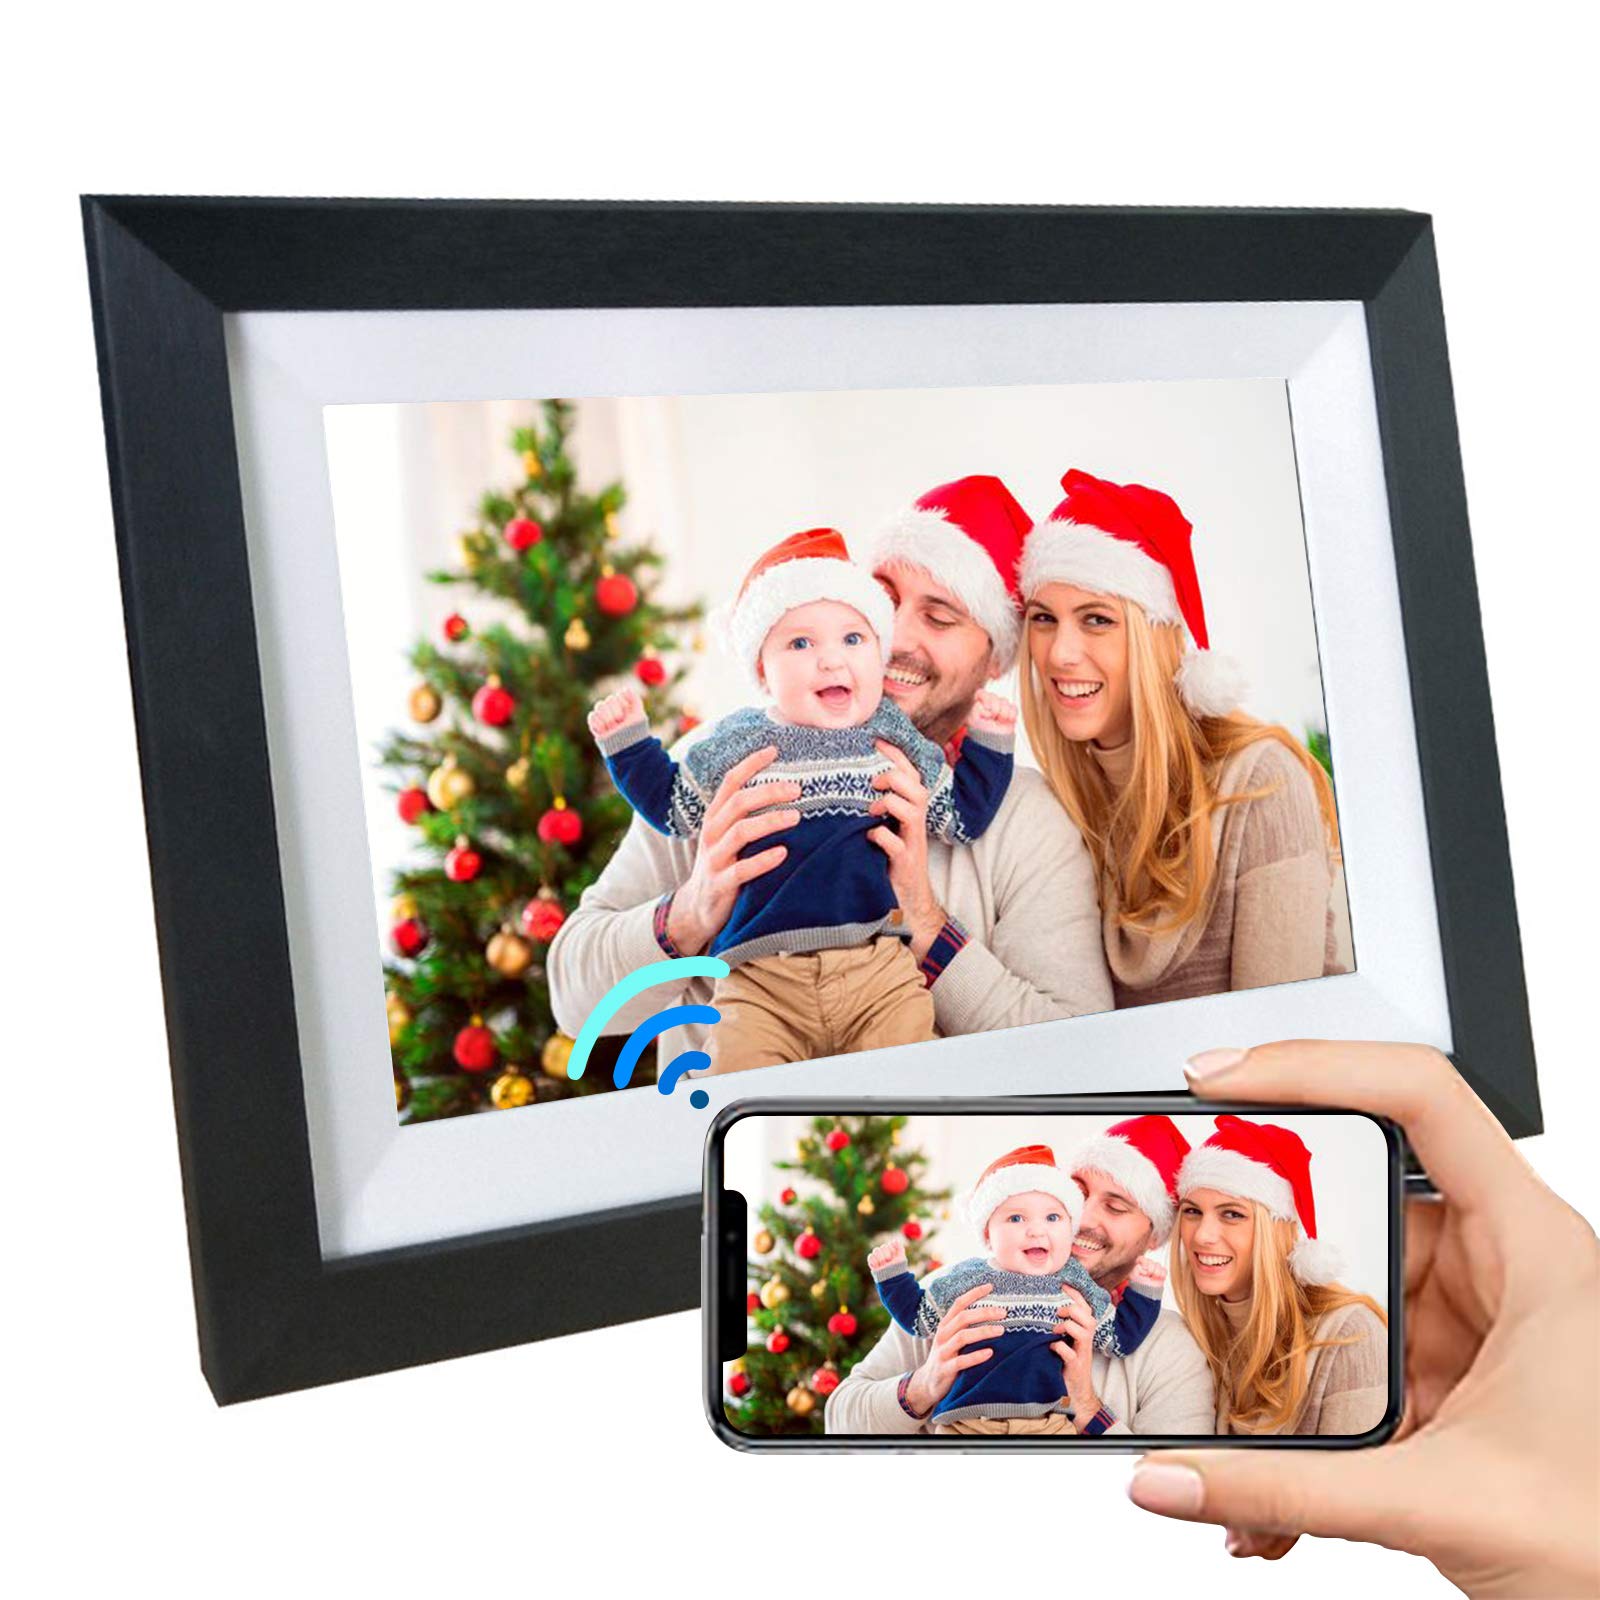 NPET Smart LCD Digital Picture Frame WiFi 10.1 Inch 16GB with IPS Touch Screen HD Display Background Music Support 1080P Video Easy Setup to Send Photos&Video Remotely via App (10 inch)